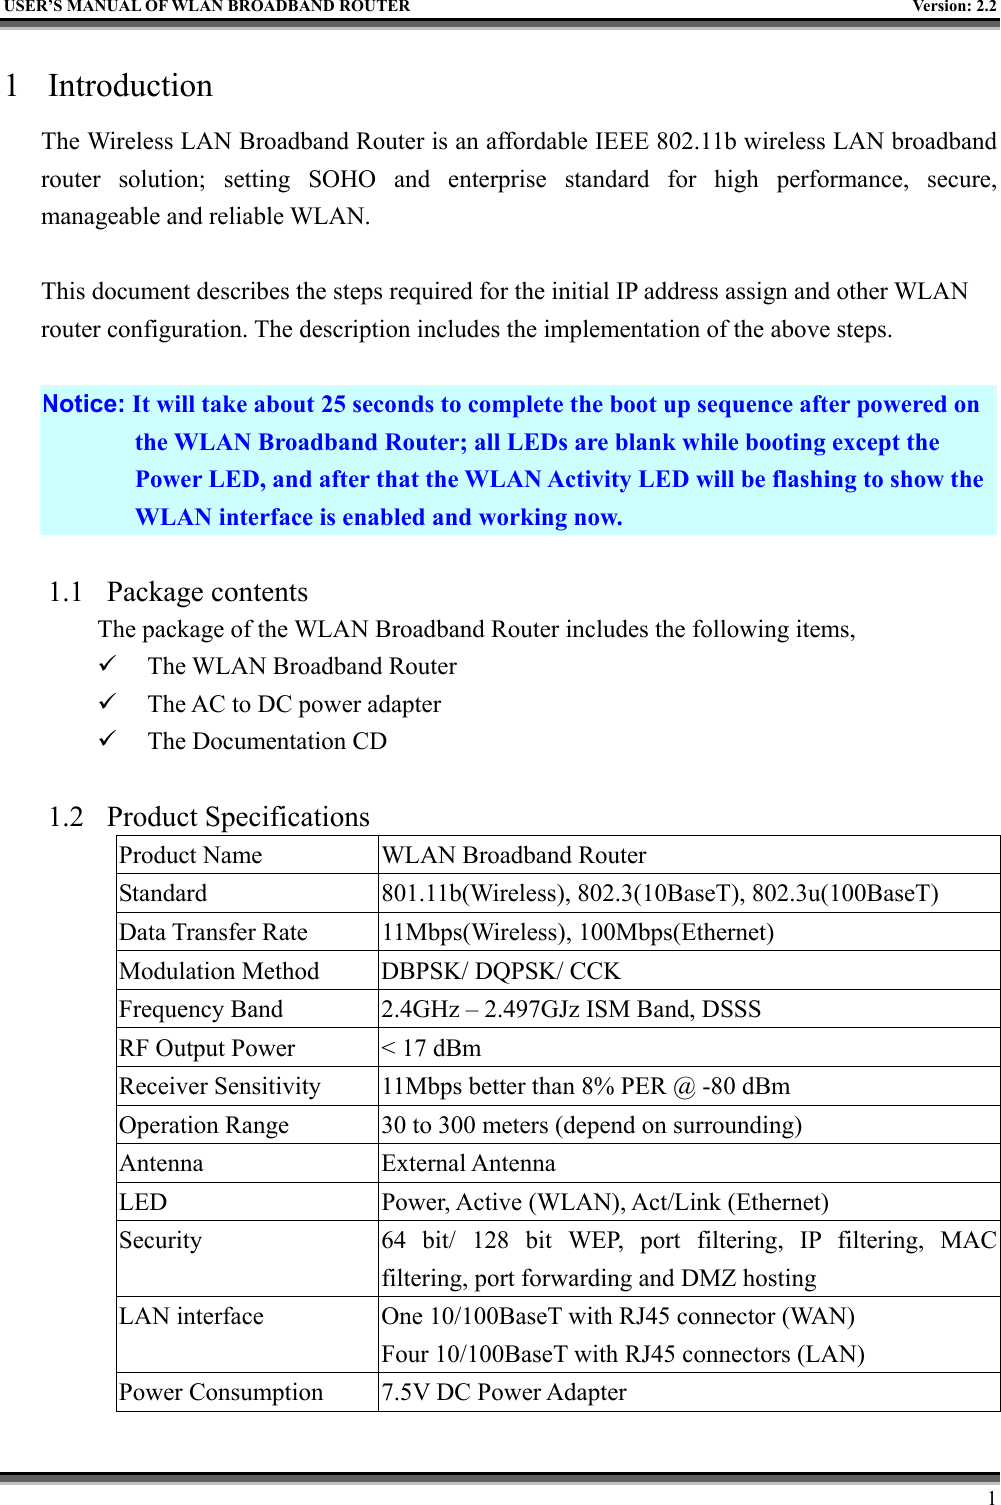   USER’S MANUAL OF WLAN BROADBAND ROUTER    Version: 2.2     1 1 Introduction The Wireless LAN Broadband Router is an affordable IEEE 802.11b wireless LAN broadband router solution; setting SOHO and enterprise standard for high performance, secure, manageable and reliable WLAN.  This document describes the steps required for the initial IP address assign and other WLAN router configuration. The description includes the implementation of the above steps.  Notice: It will take about 25 seconds to complete the boot up sequence after powered on the WLAN Broadband Router; all LEDs are blank while booting except the Power LED, and after that the WLAN Activity LED will be flashing to show the WLAN interface is enabled and working now.  1.1 Package contents The package of the WLAN Broadband Router includes the following items,   The WLAN Broadband Router   The AC to DC power adapter   The Documentation CD  1.2 Product Specifications Product Name  WLAN Broadband Router Standard  801.11b(Wireless), 802.3(10BaseT), 802.3u(100BaseT) Data Transfer Rate  11Mbps(Wireless), 100Mbps(Ethernet) Modulation Method  DBPSK/ DQPSK/ CCK Frequency Band  2.4GHz – 2.497GJz ISM Band, DSSS RF Output Power  &lt; 17 dBm Receiver Sensitivity  11Mbps better than 8% PER @ -80 dBm Operation Range  30 to 300 meters (depend on surrounding) Antenna External Antenna LED  Power, Active (WLAN), Act/Link (Ethernet) Security  64 bit/ 128 bit WEP, port filtering, IP filtering, MAC filtering, port forwarding and DMZ hosting LAN interface  One 10/100BaseT with RJ45 connector (WAN) Four 10/100BaseT with RJ45 connectors (LAN) Power Consumption  7.5V DC Power Adapter 